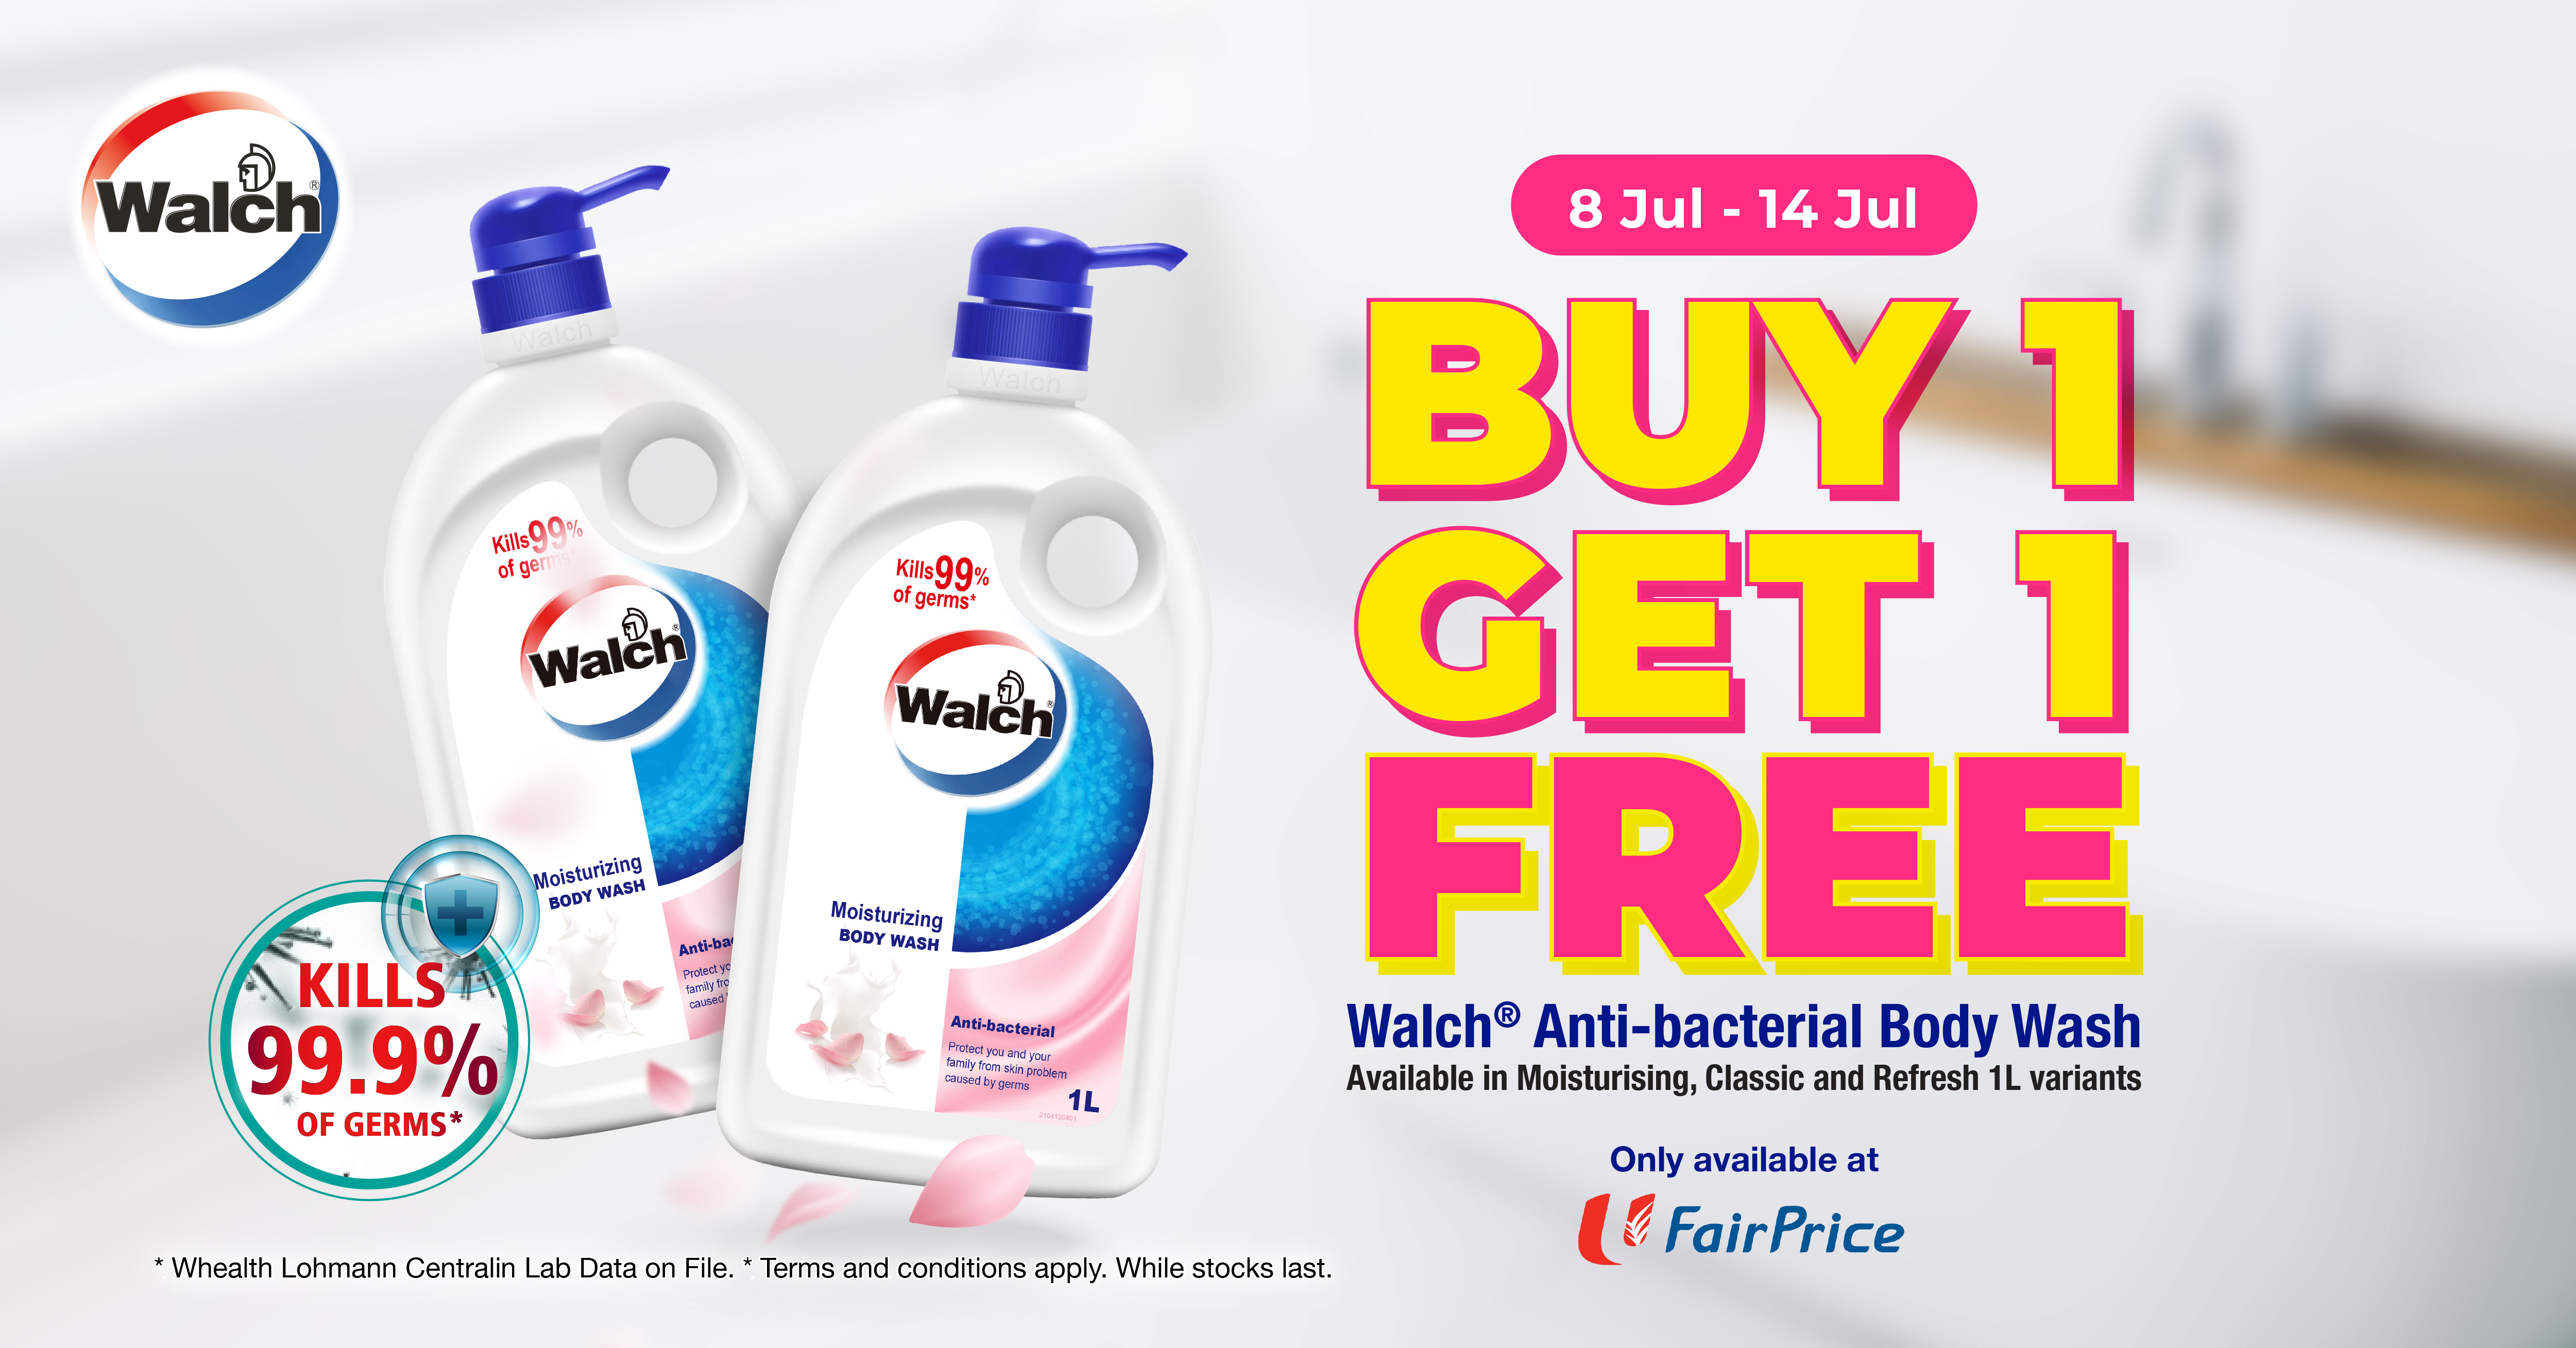 Buy 1 Get 1 Free Walch®️ Anti-bacterial Body Wash 1000ml at FairPrice from 8 - 14 July 2021